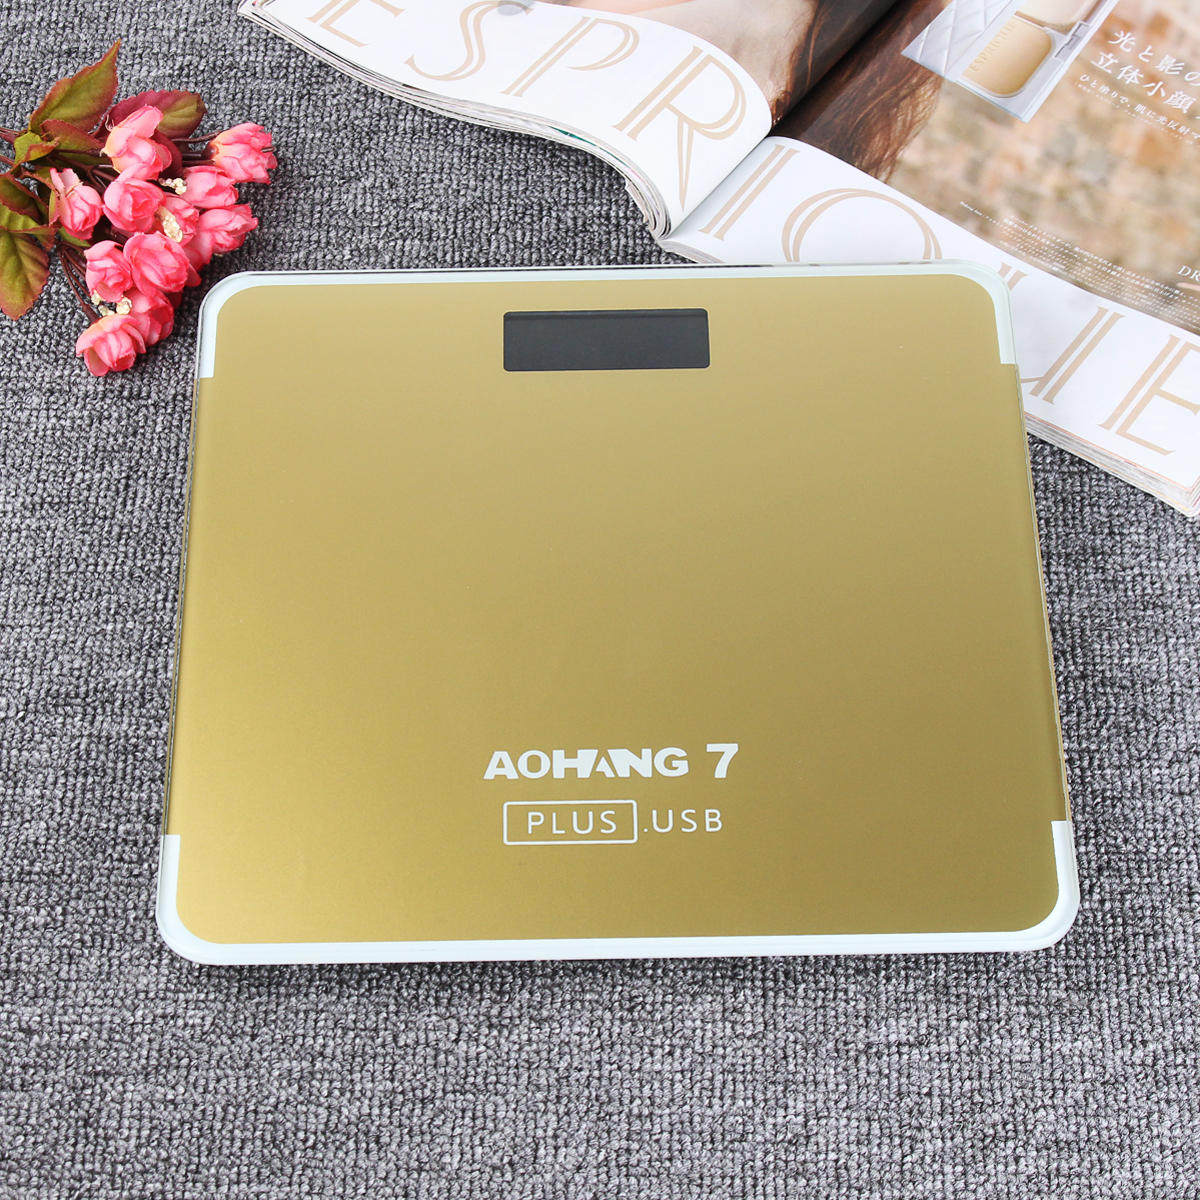 AOHANG 7 Plus USB Version 180kg LCD Electronic Digital Tempered Glass Body Weight Scale